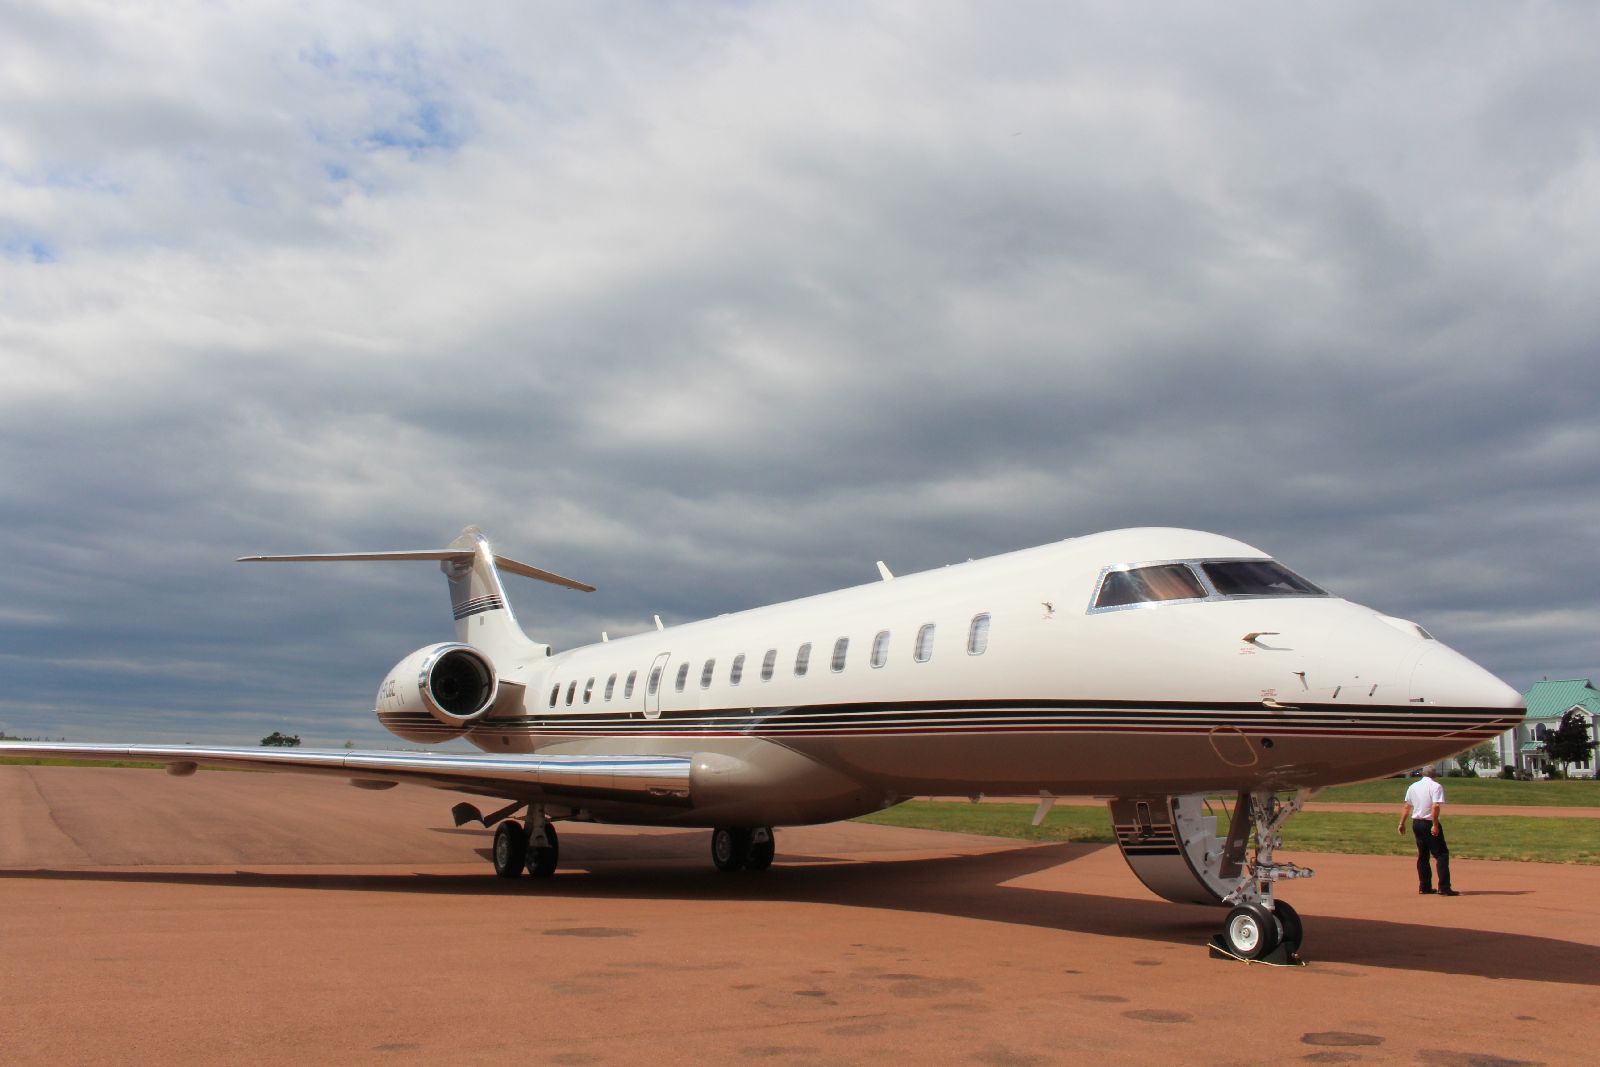 Flight in on a private jet to enjoy luxurious accommodations & unlimited golf